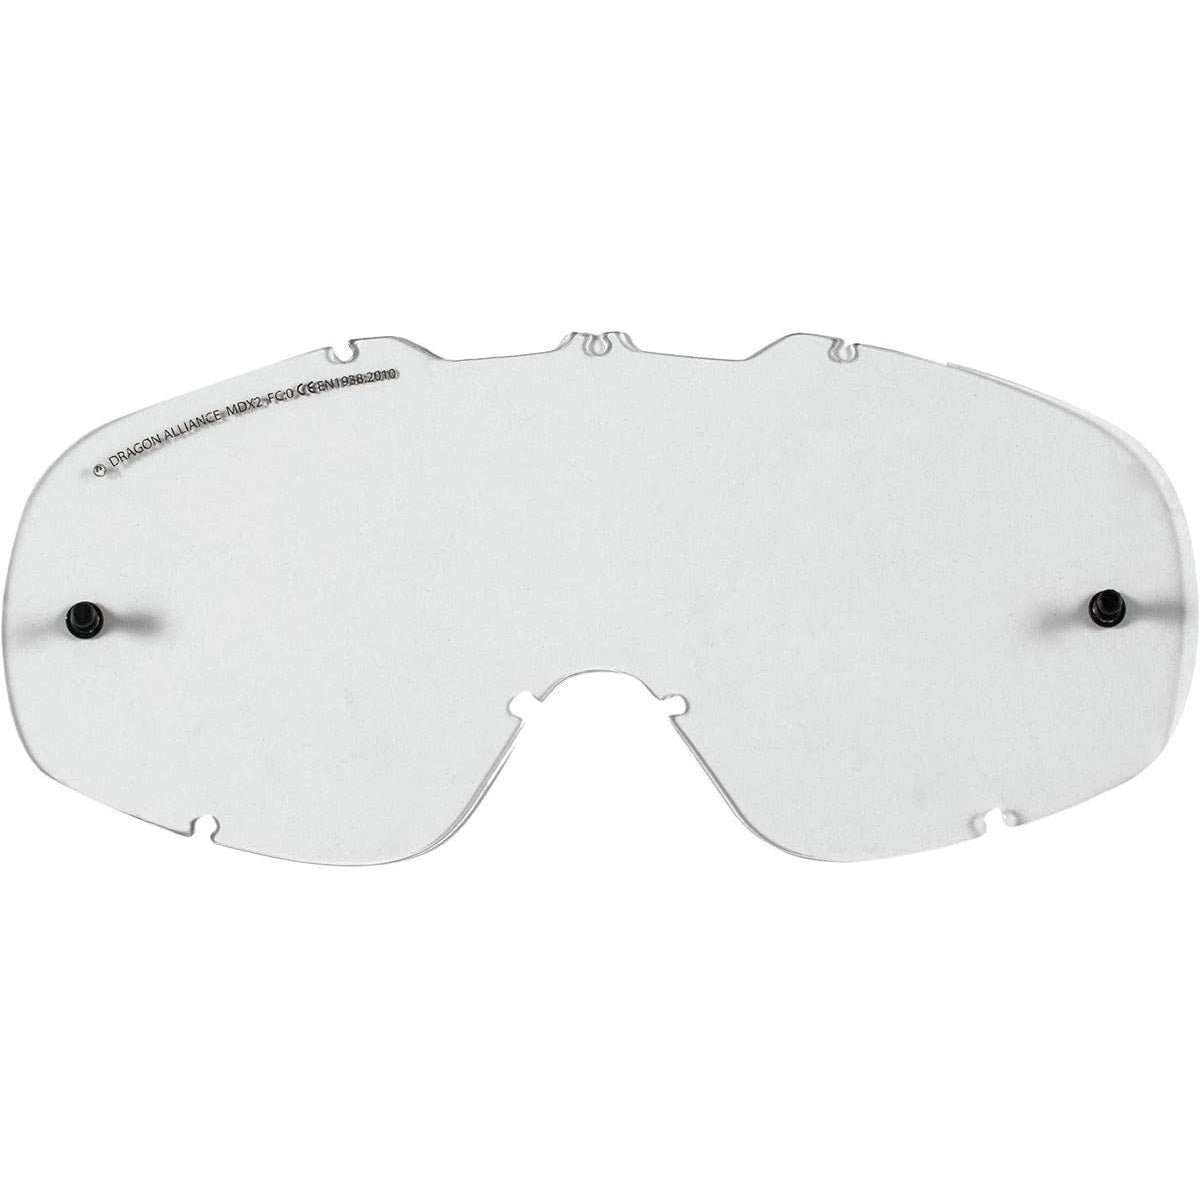 Dragon Alliance MDX2 All Weather Replacement Lens Goggle Accessories-722-6062